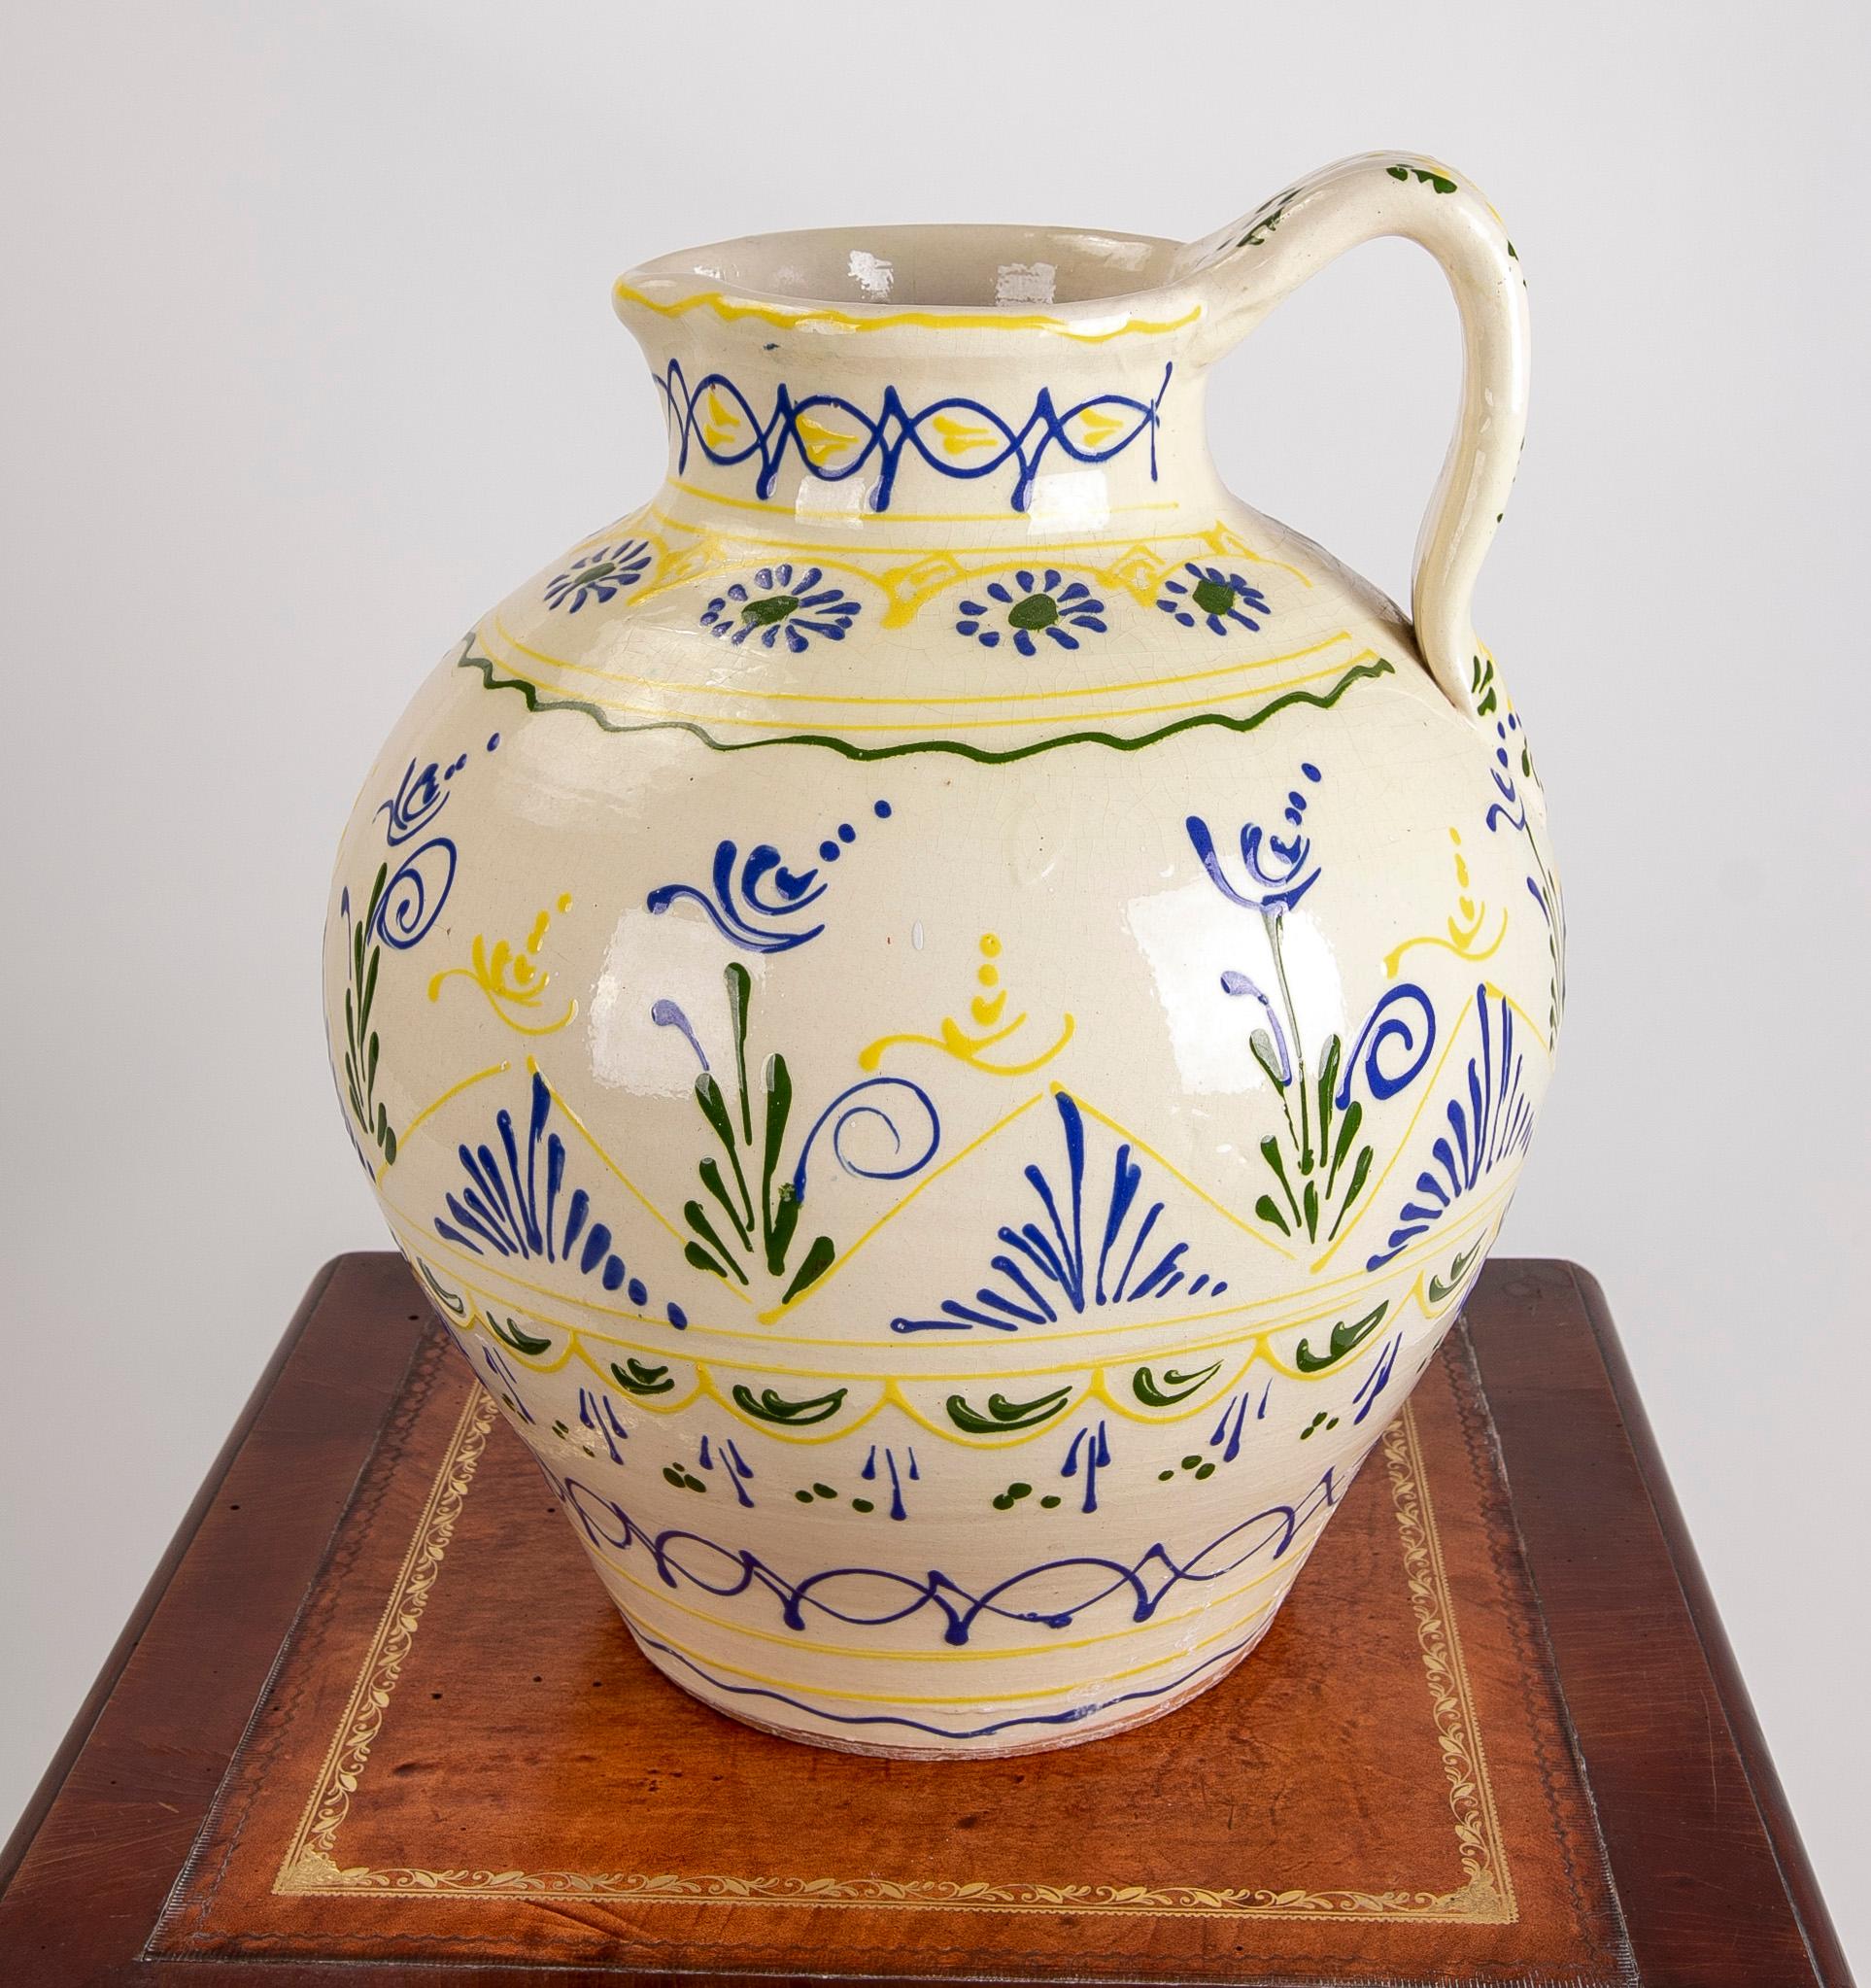 1980s Spanish Hand-Painted Ceramic Jug with Handle for Wine In Good Condition For Sale In Marbella, ES